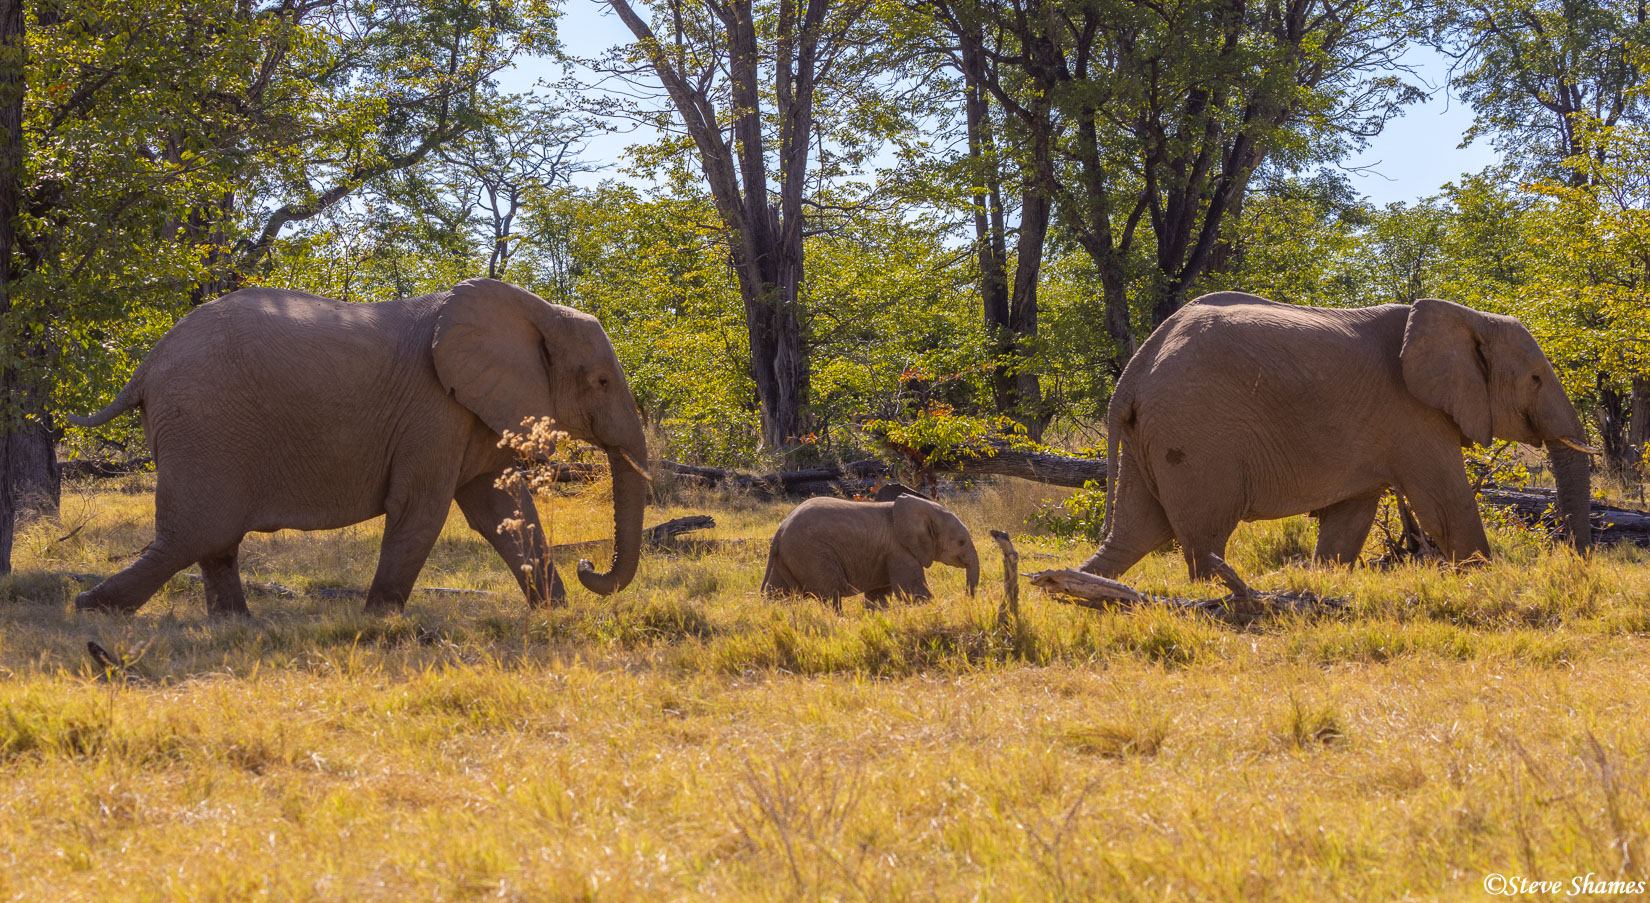 Moremi elephants walking with the youngster protected in the middle.